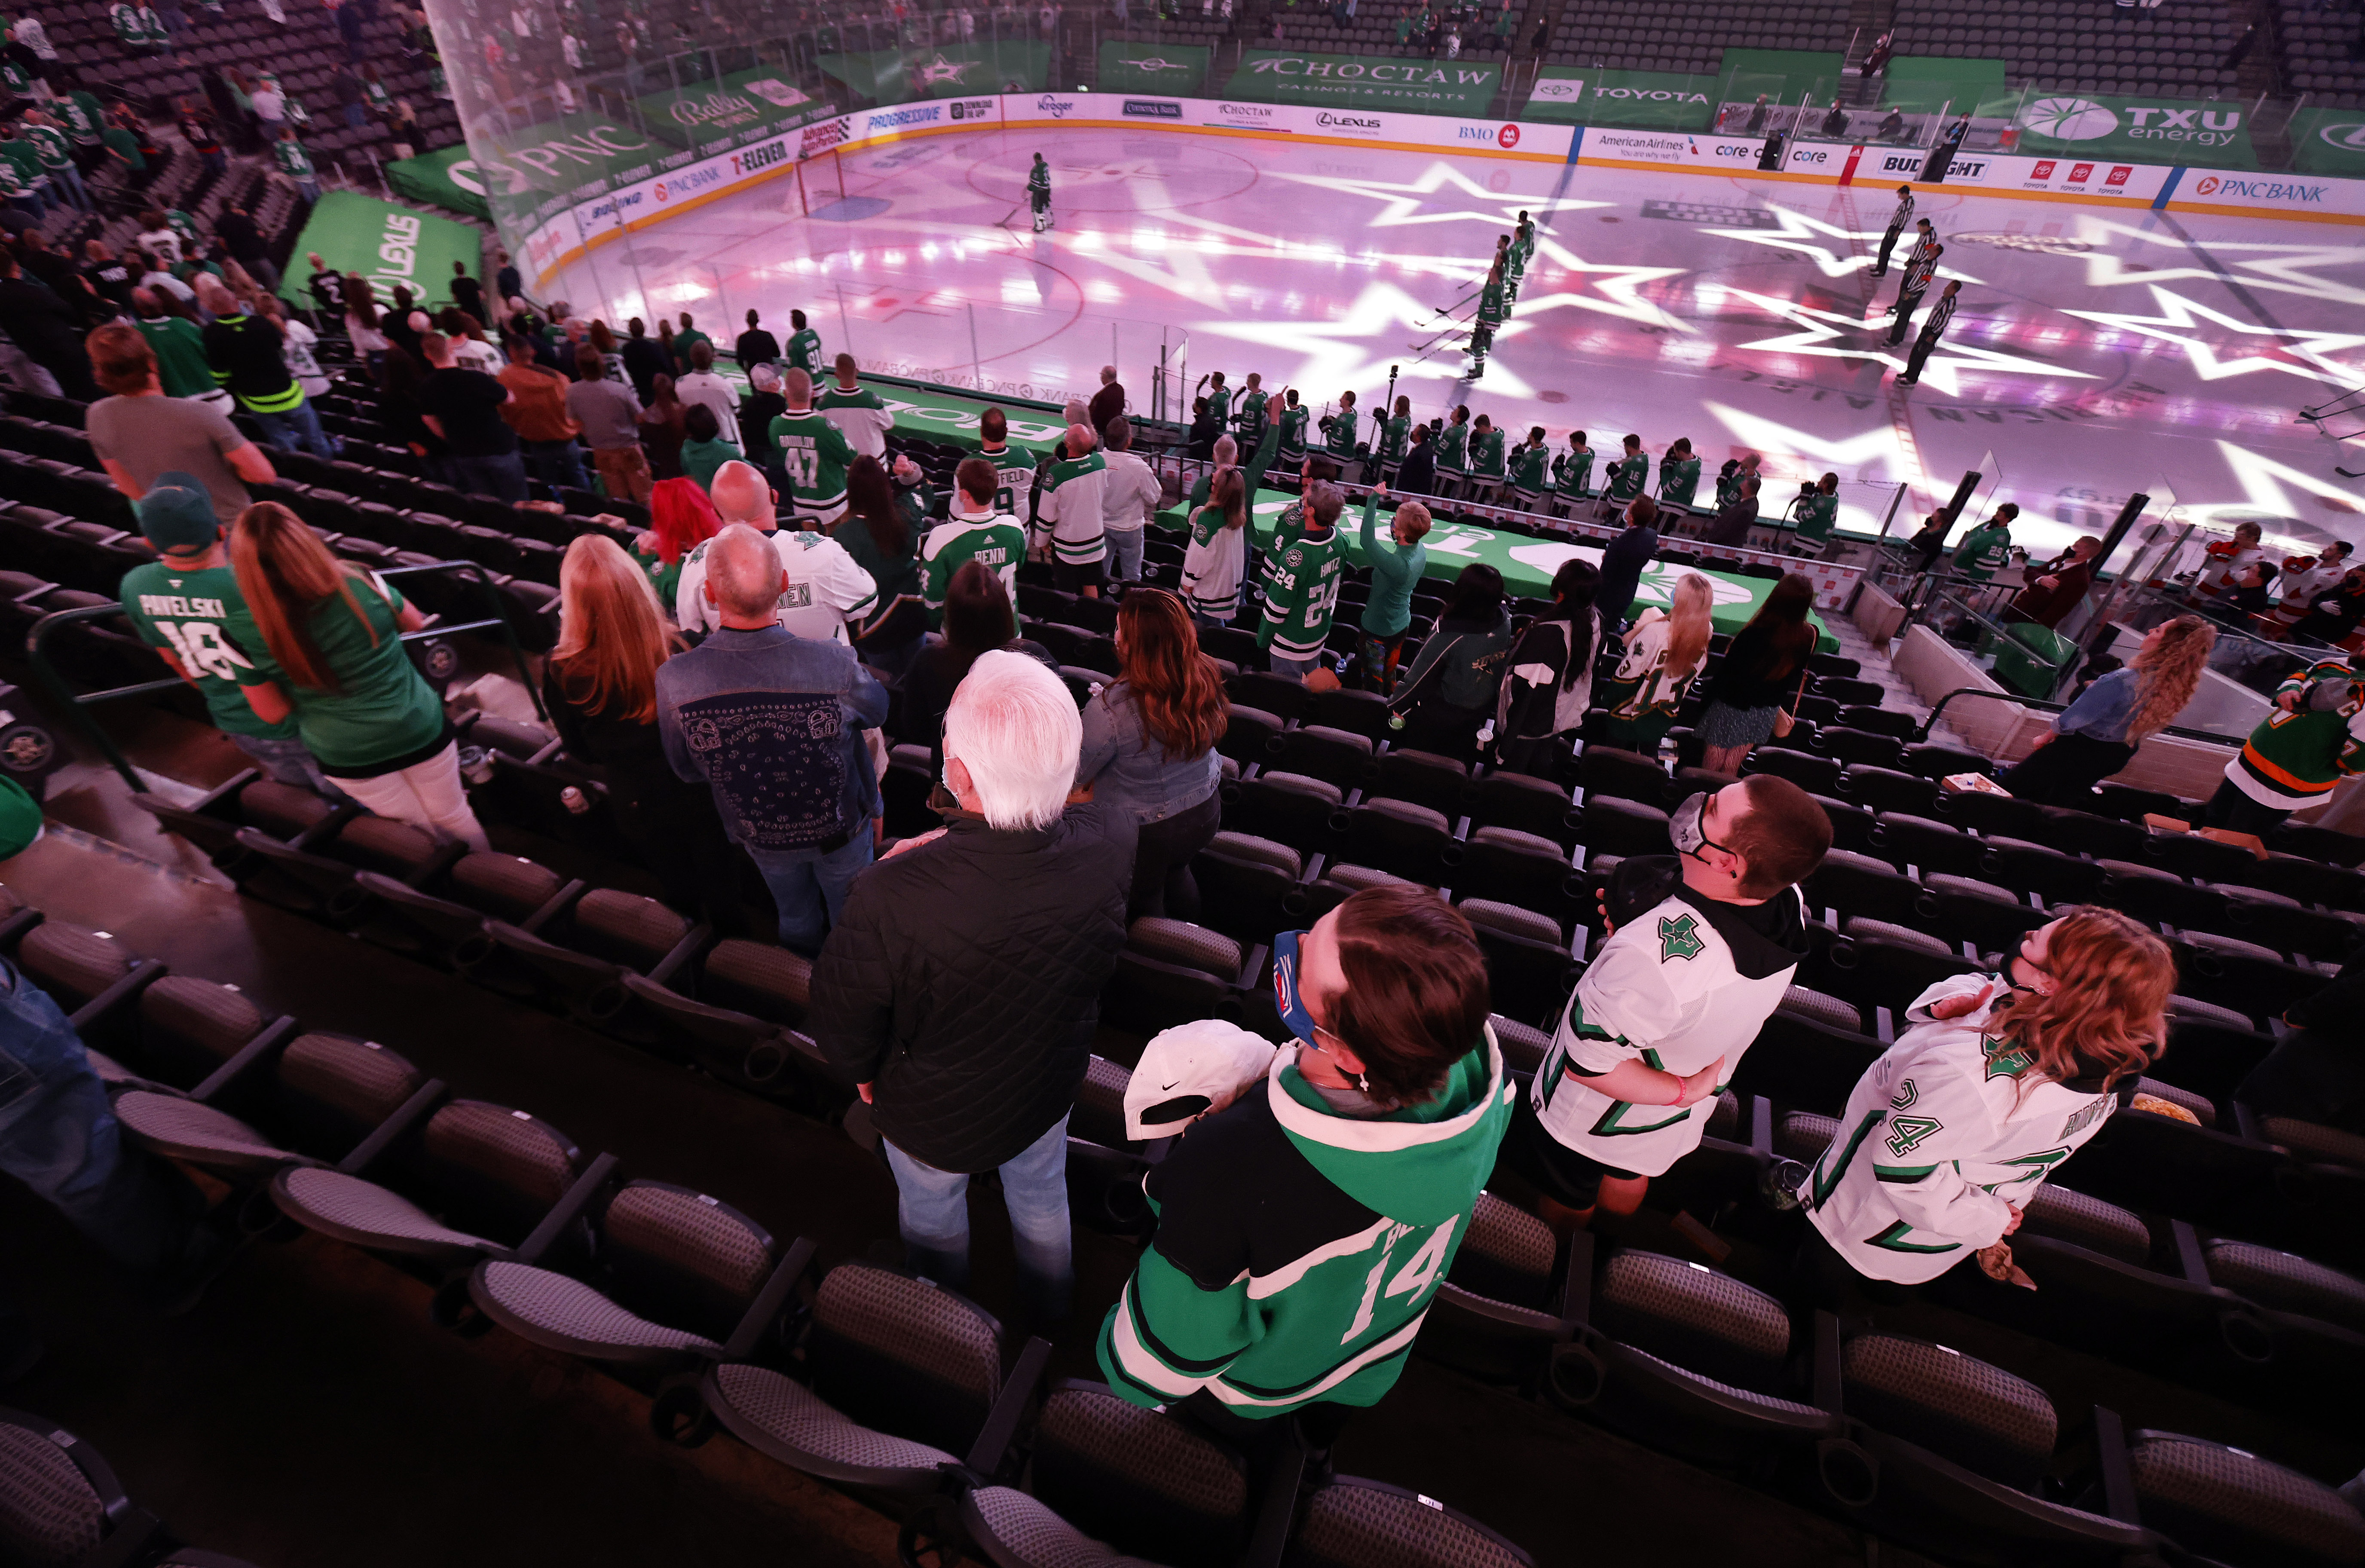 Stars announce promotion of Brad Alberts to president, CEO